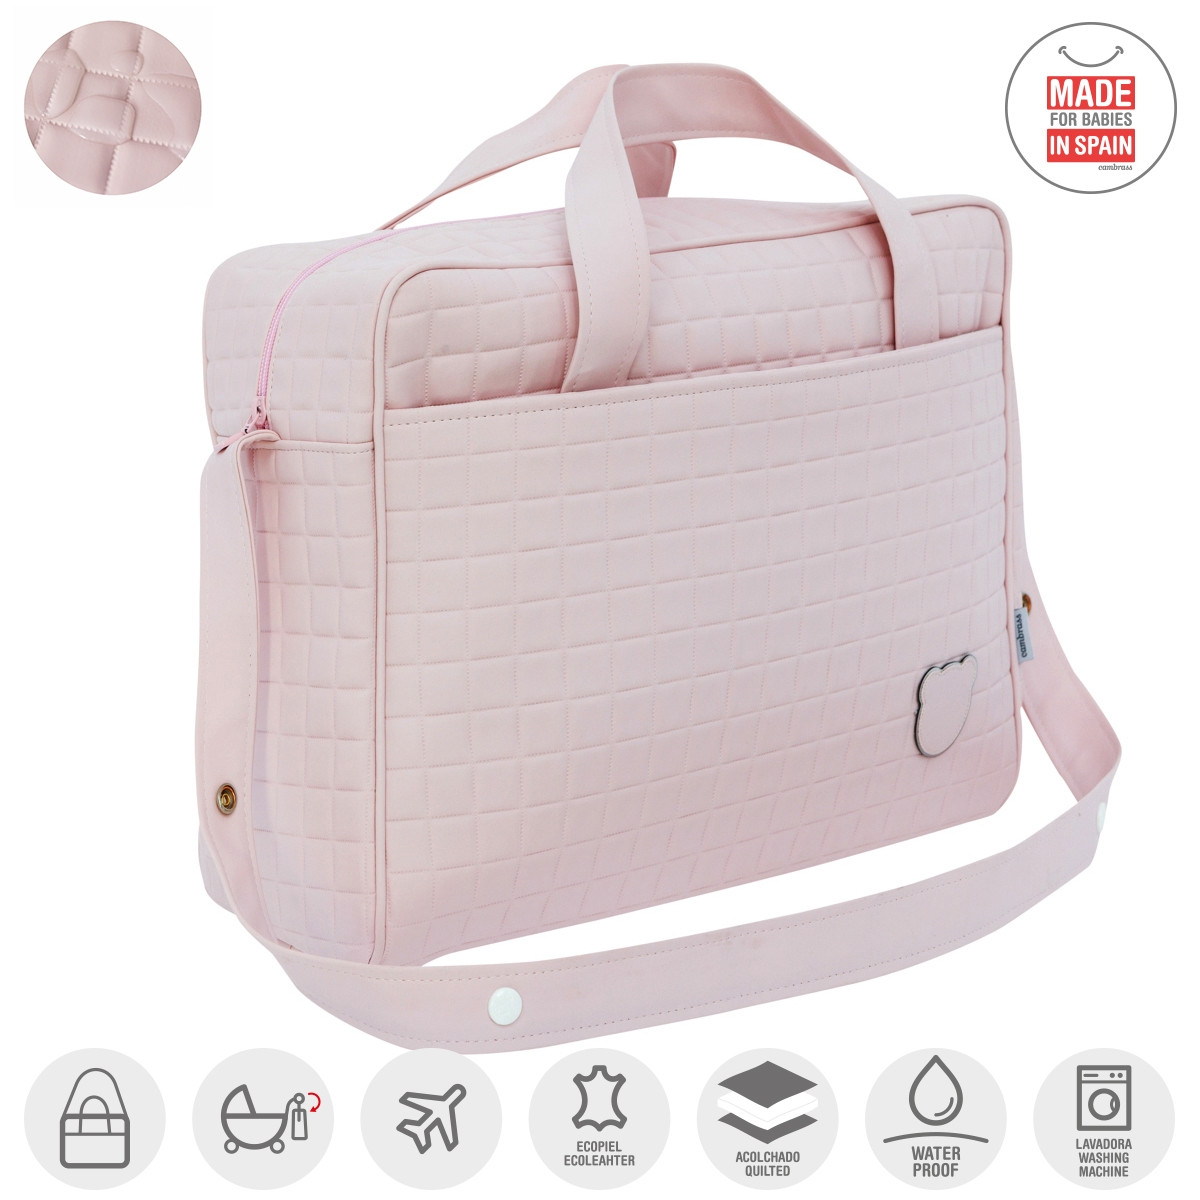 MATERNITY BAG GOFRE PINK 20x44x33 CM CAMBRASS - 3